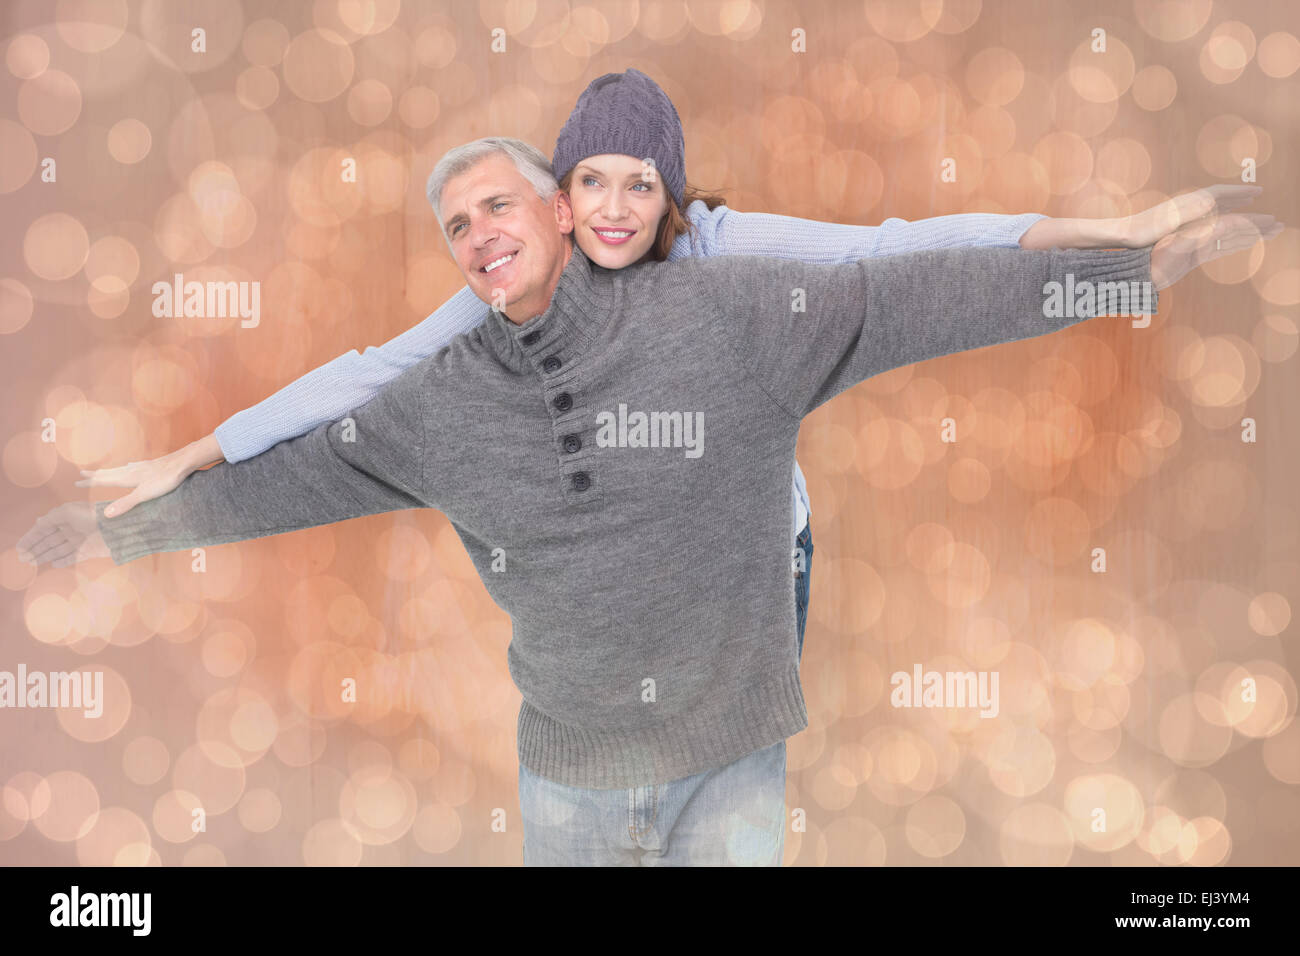 Composite image of carefree couple in warm clothing Stock Photo